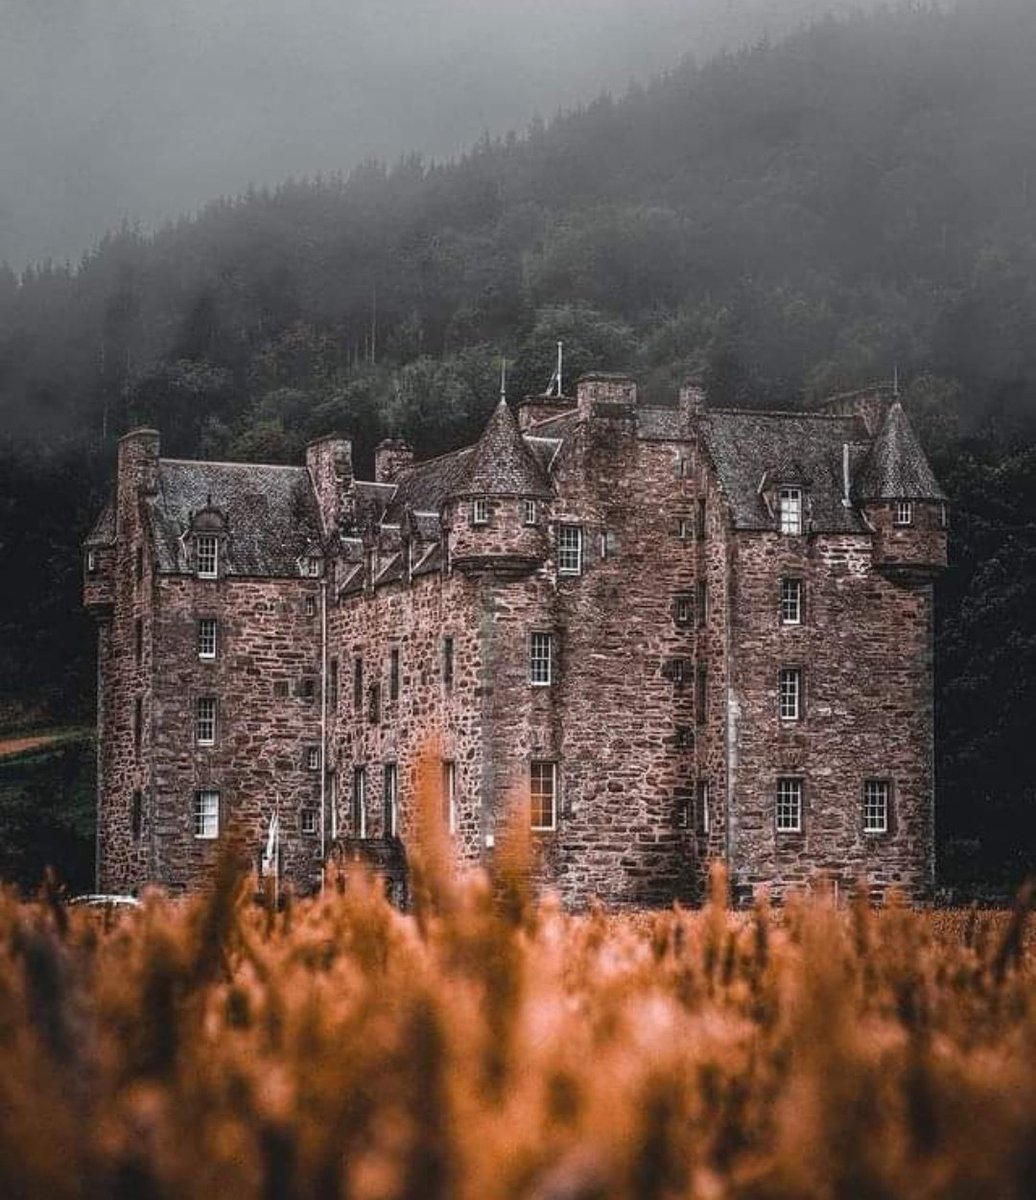 16th century Castle Menzies 🛡️ was the seat of the Chiefs of Clan Menzies for over 400 years ⚔️🏴󠁧󠁢󠁳󠁣󠁴󠁿

📍 Castle Menzies, Perthshire